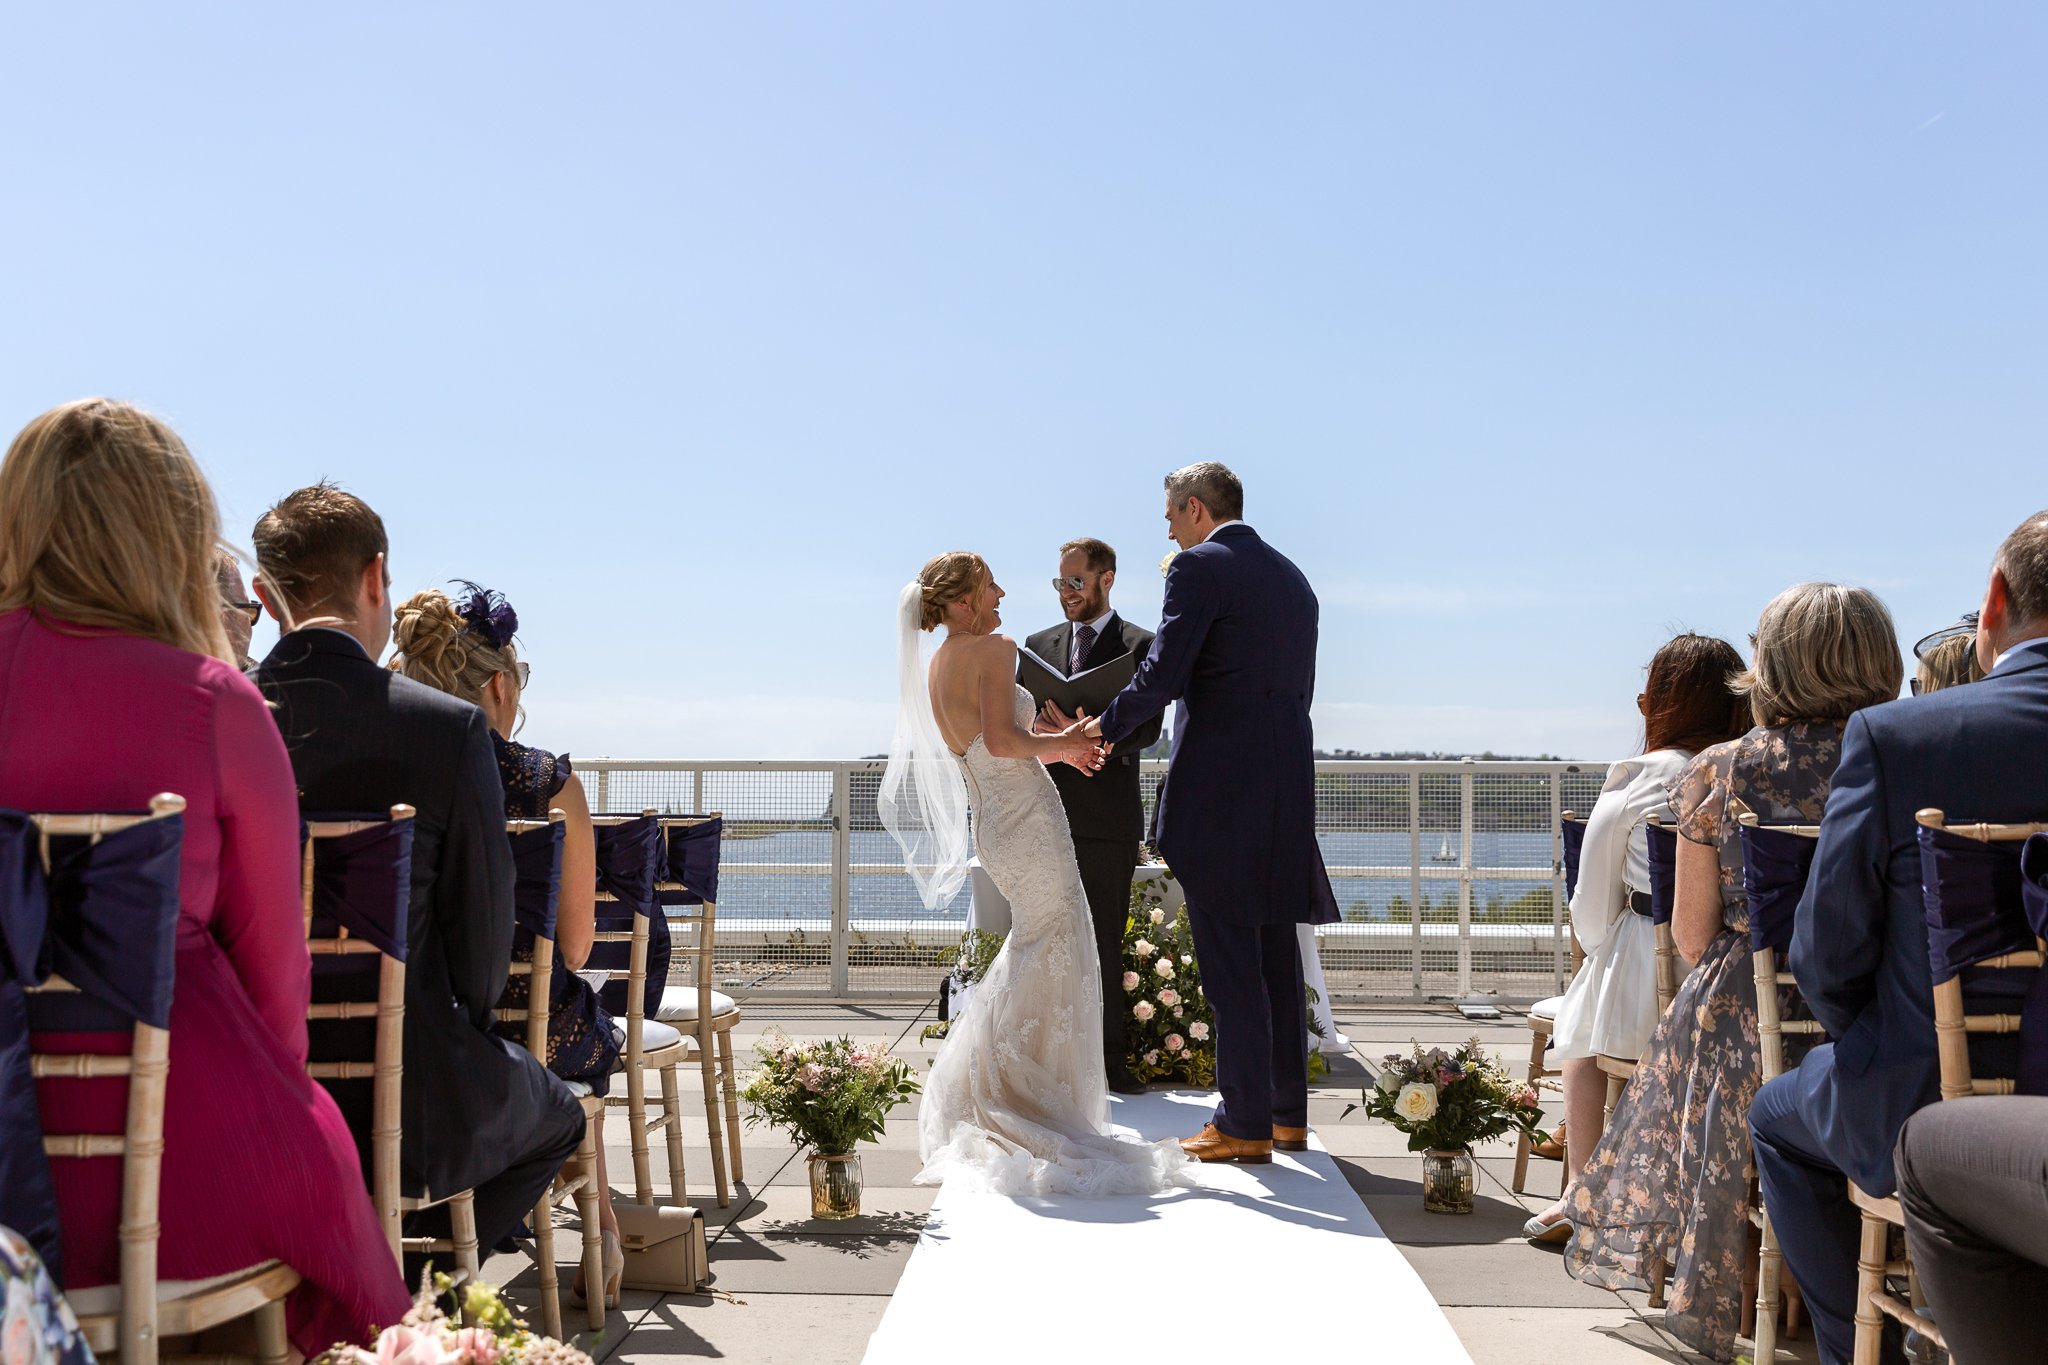 roof top wedding ceremony at vocco, st davids hotel cardiff